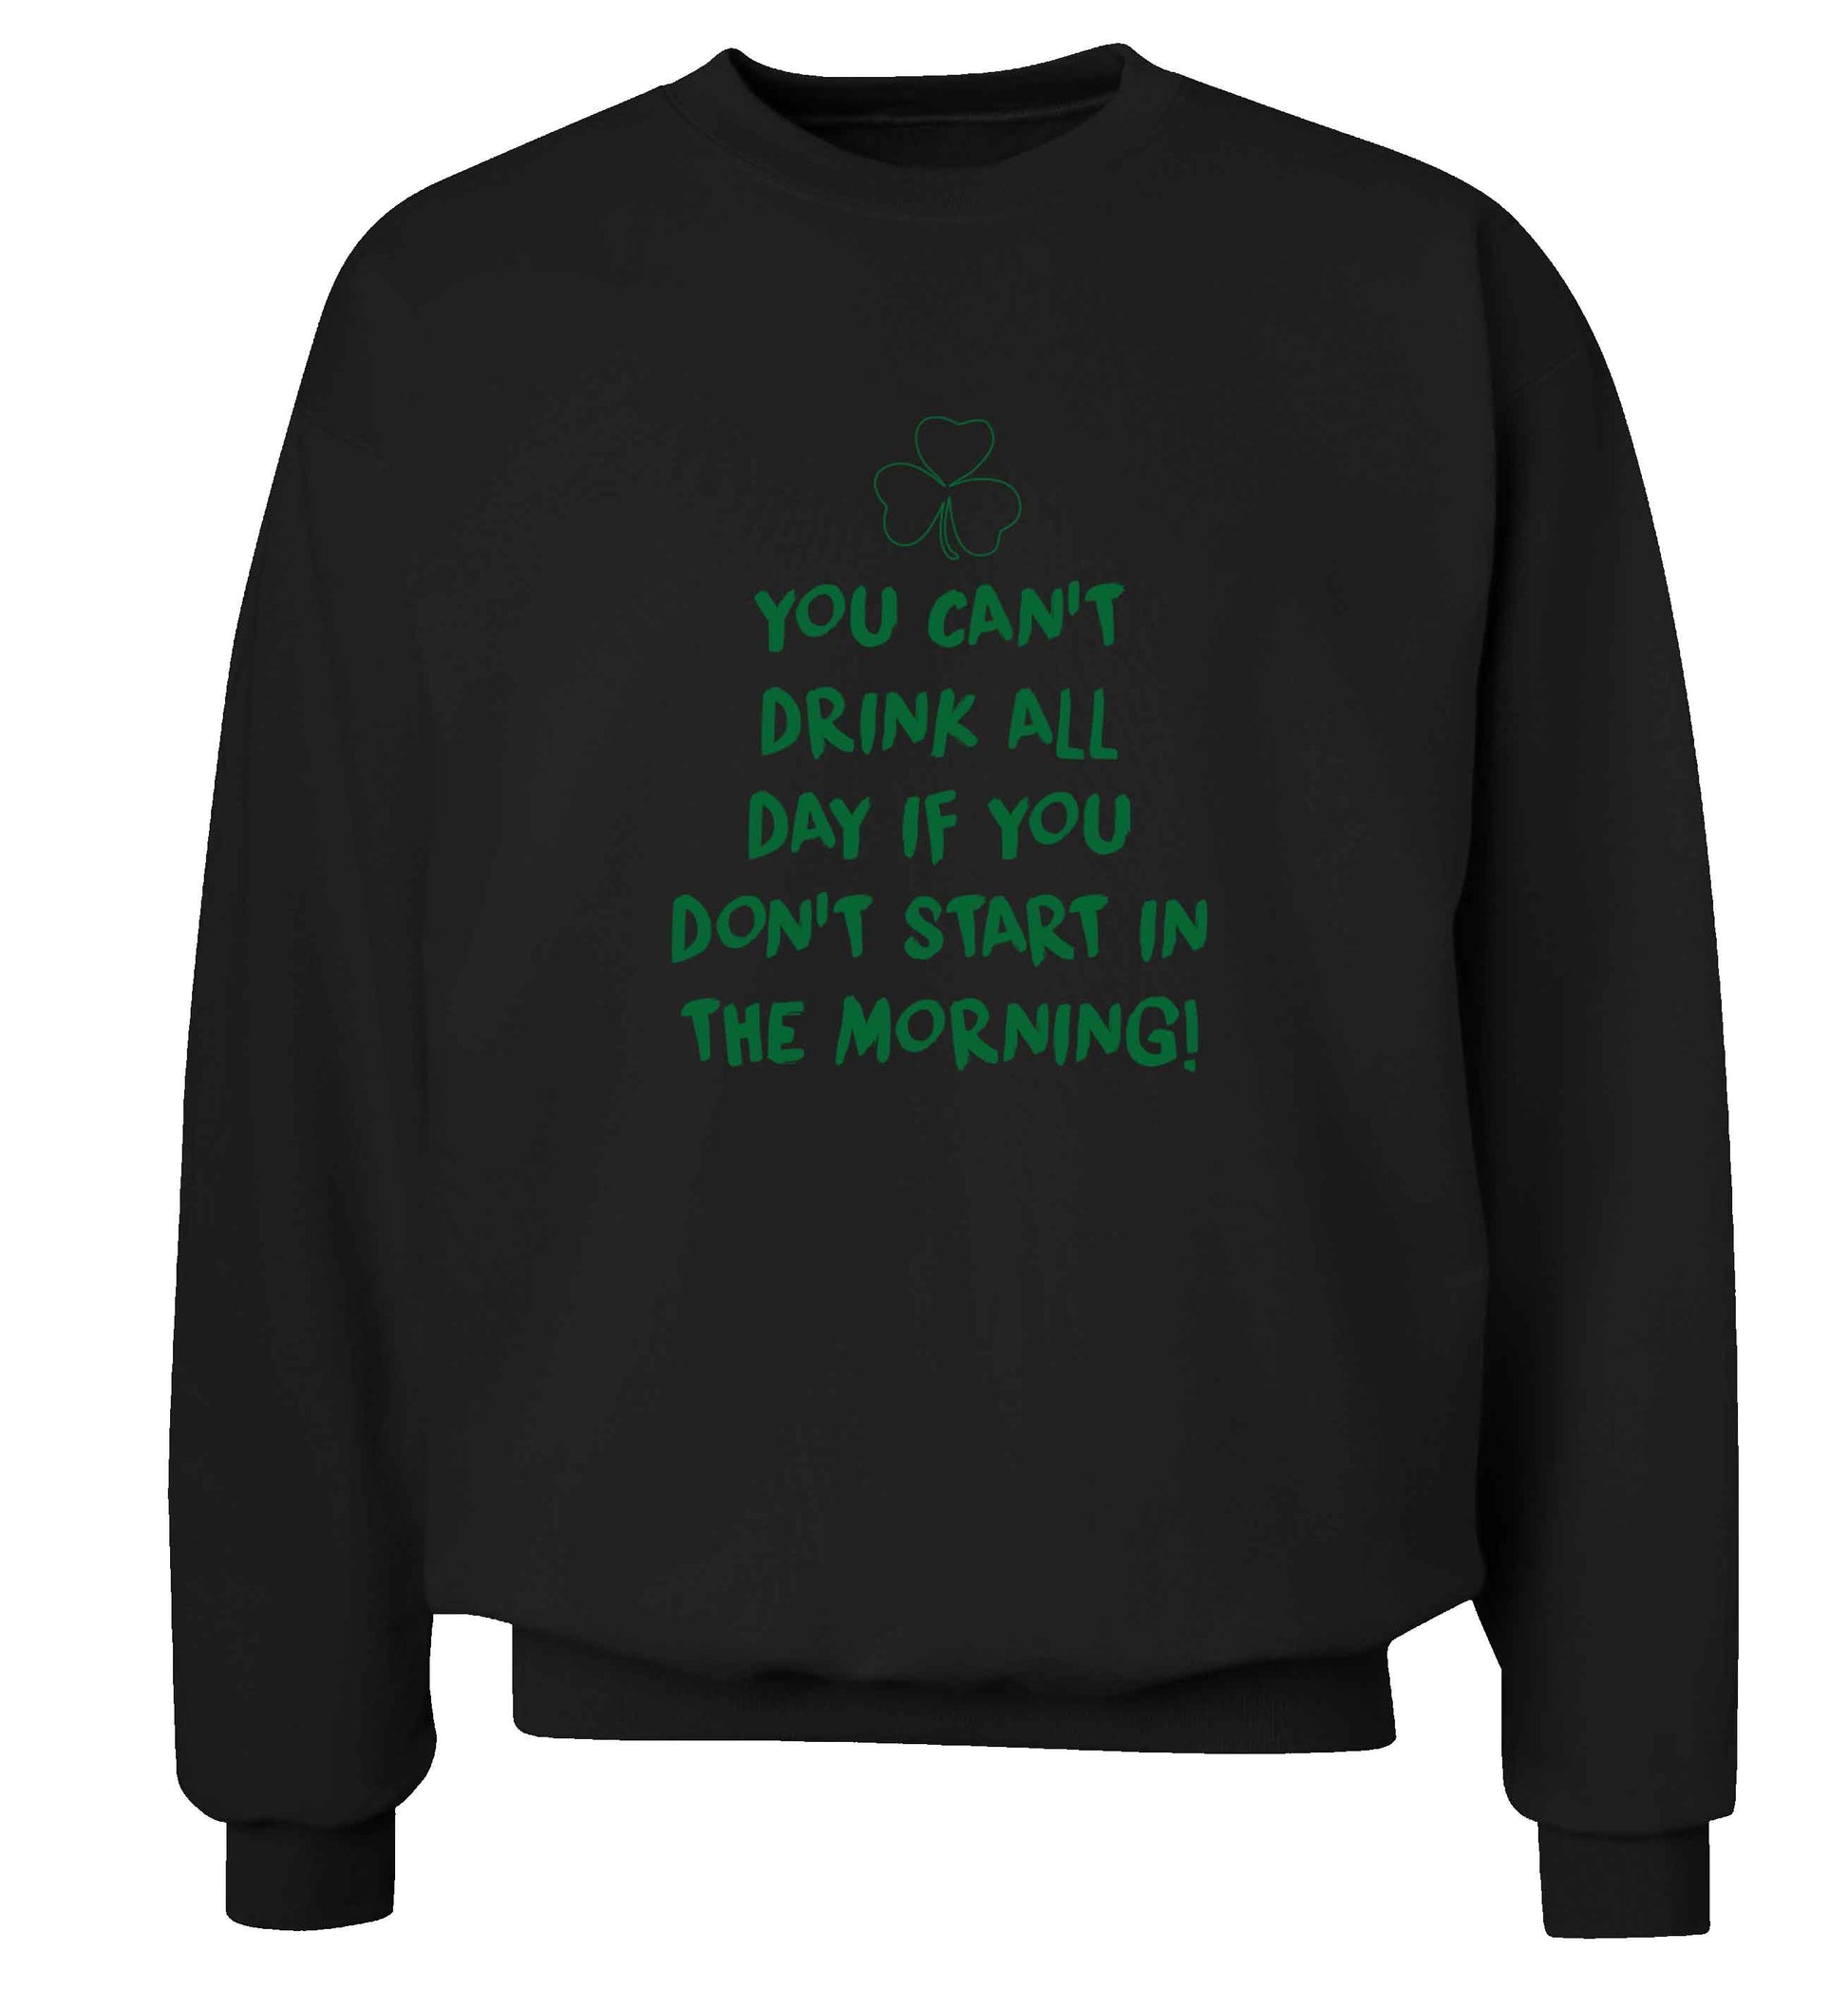 You can't drink all day if you don't start in the morning adult's unisex black sweater 2XL